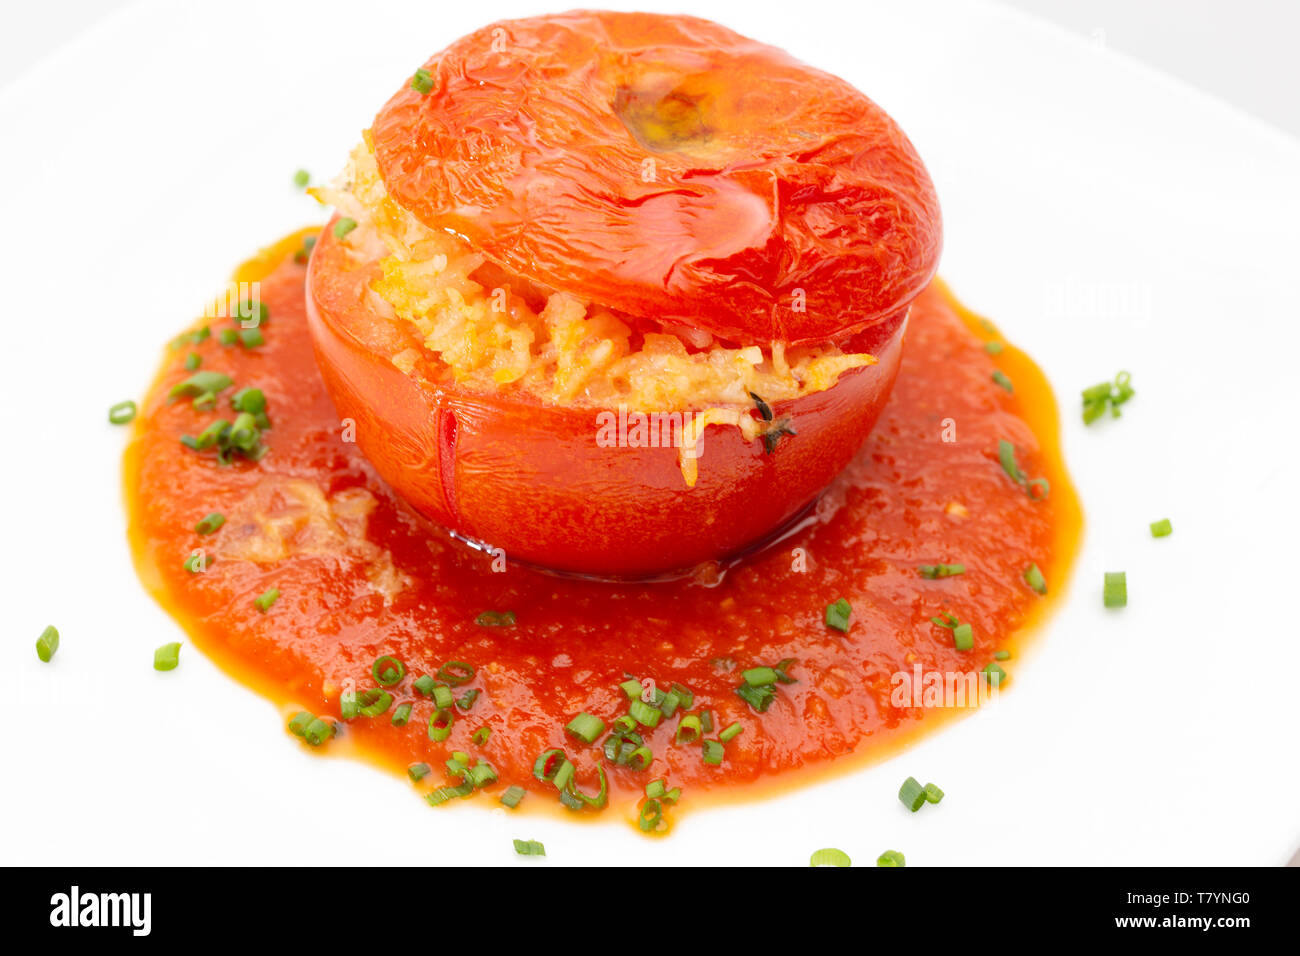 A tomato stuffed with rice and veg, served on a bed of sauce with a garnish of chopped chives. Stock Photo